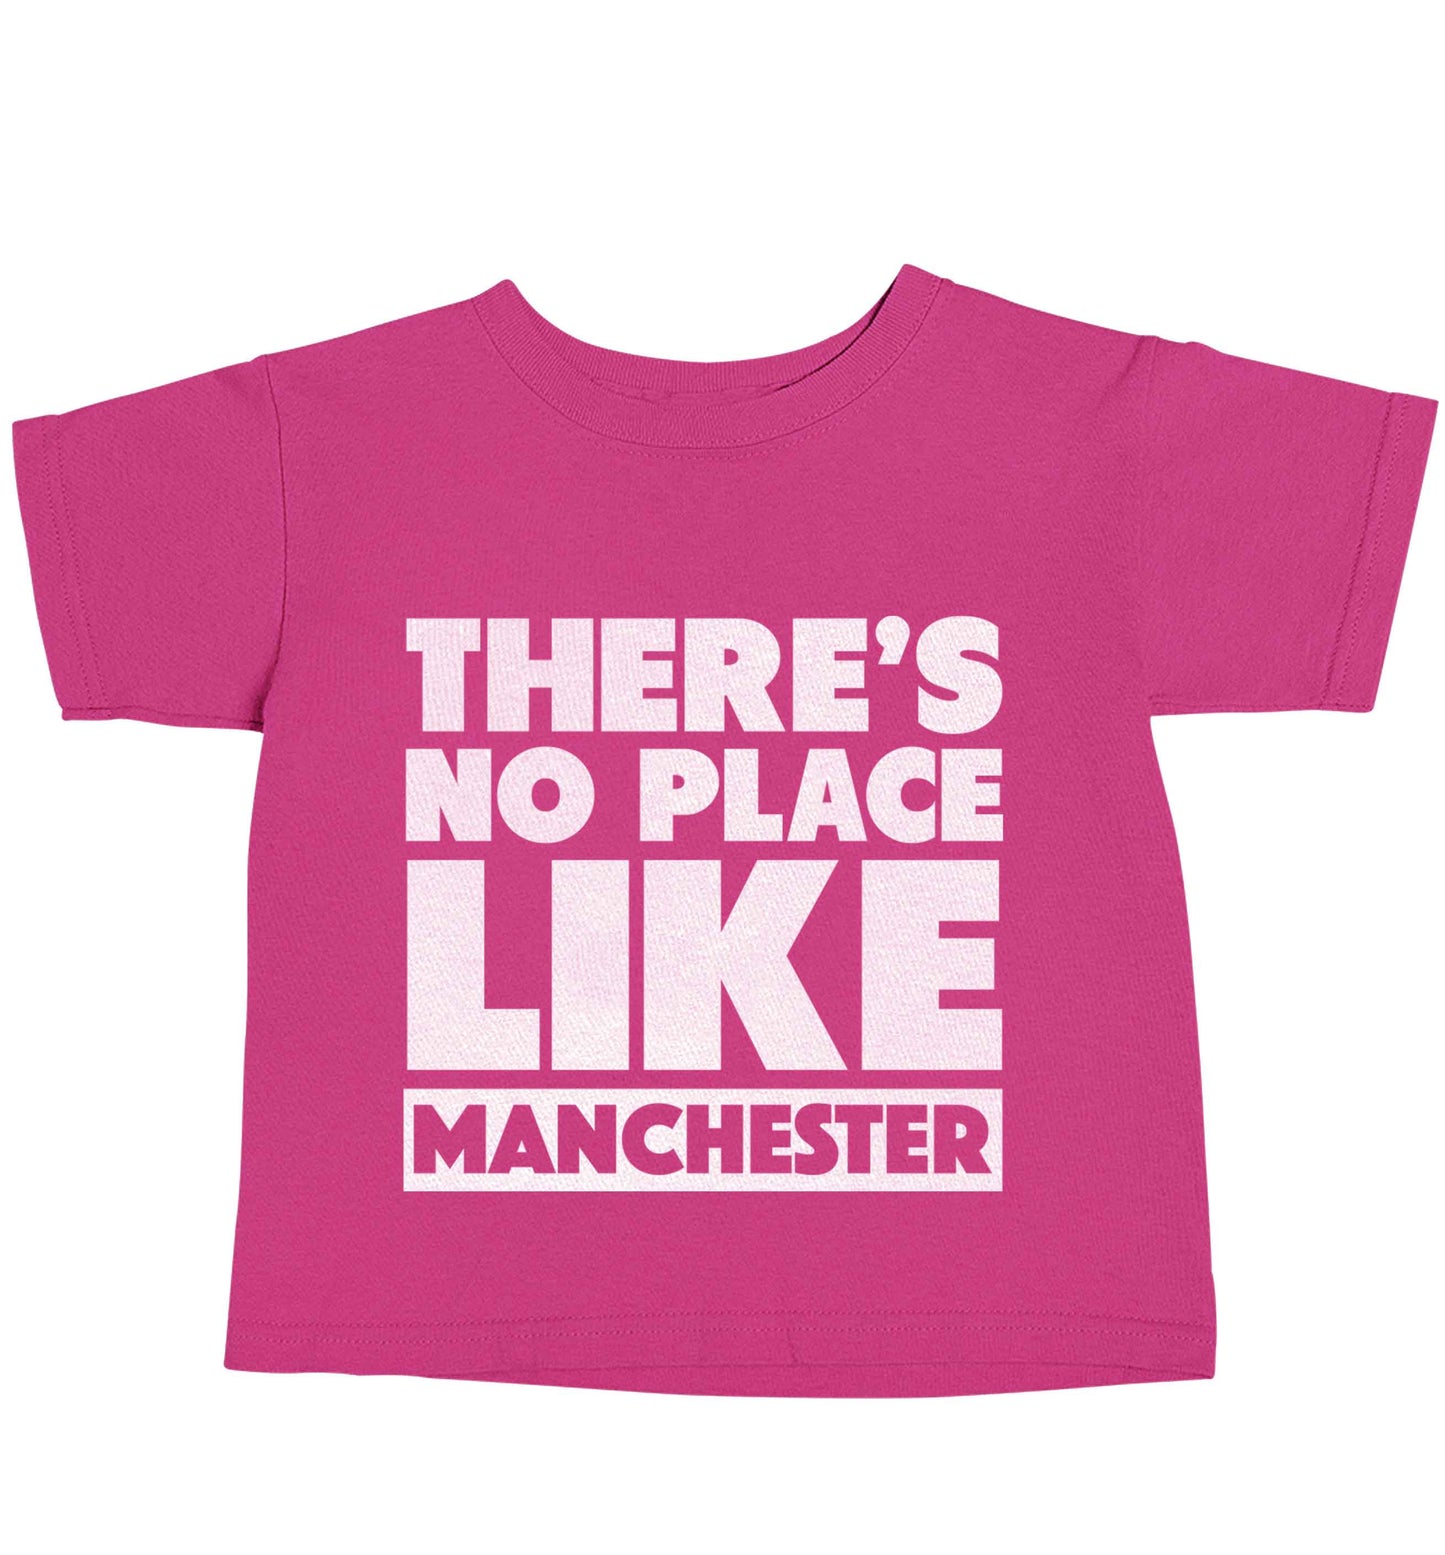 There's no place like Manchester pink baby toddler Tshirt 2 Years